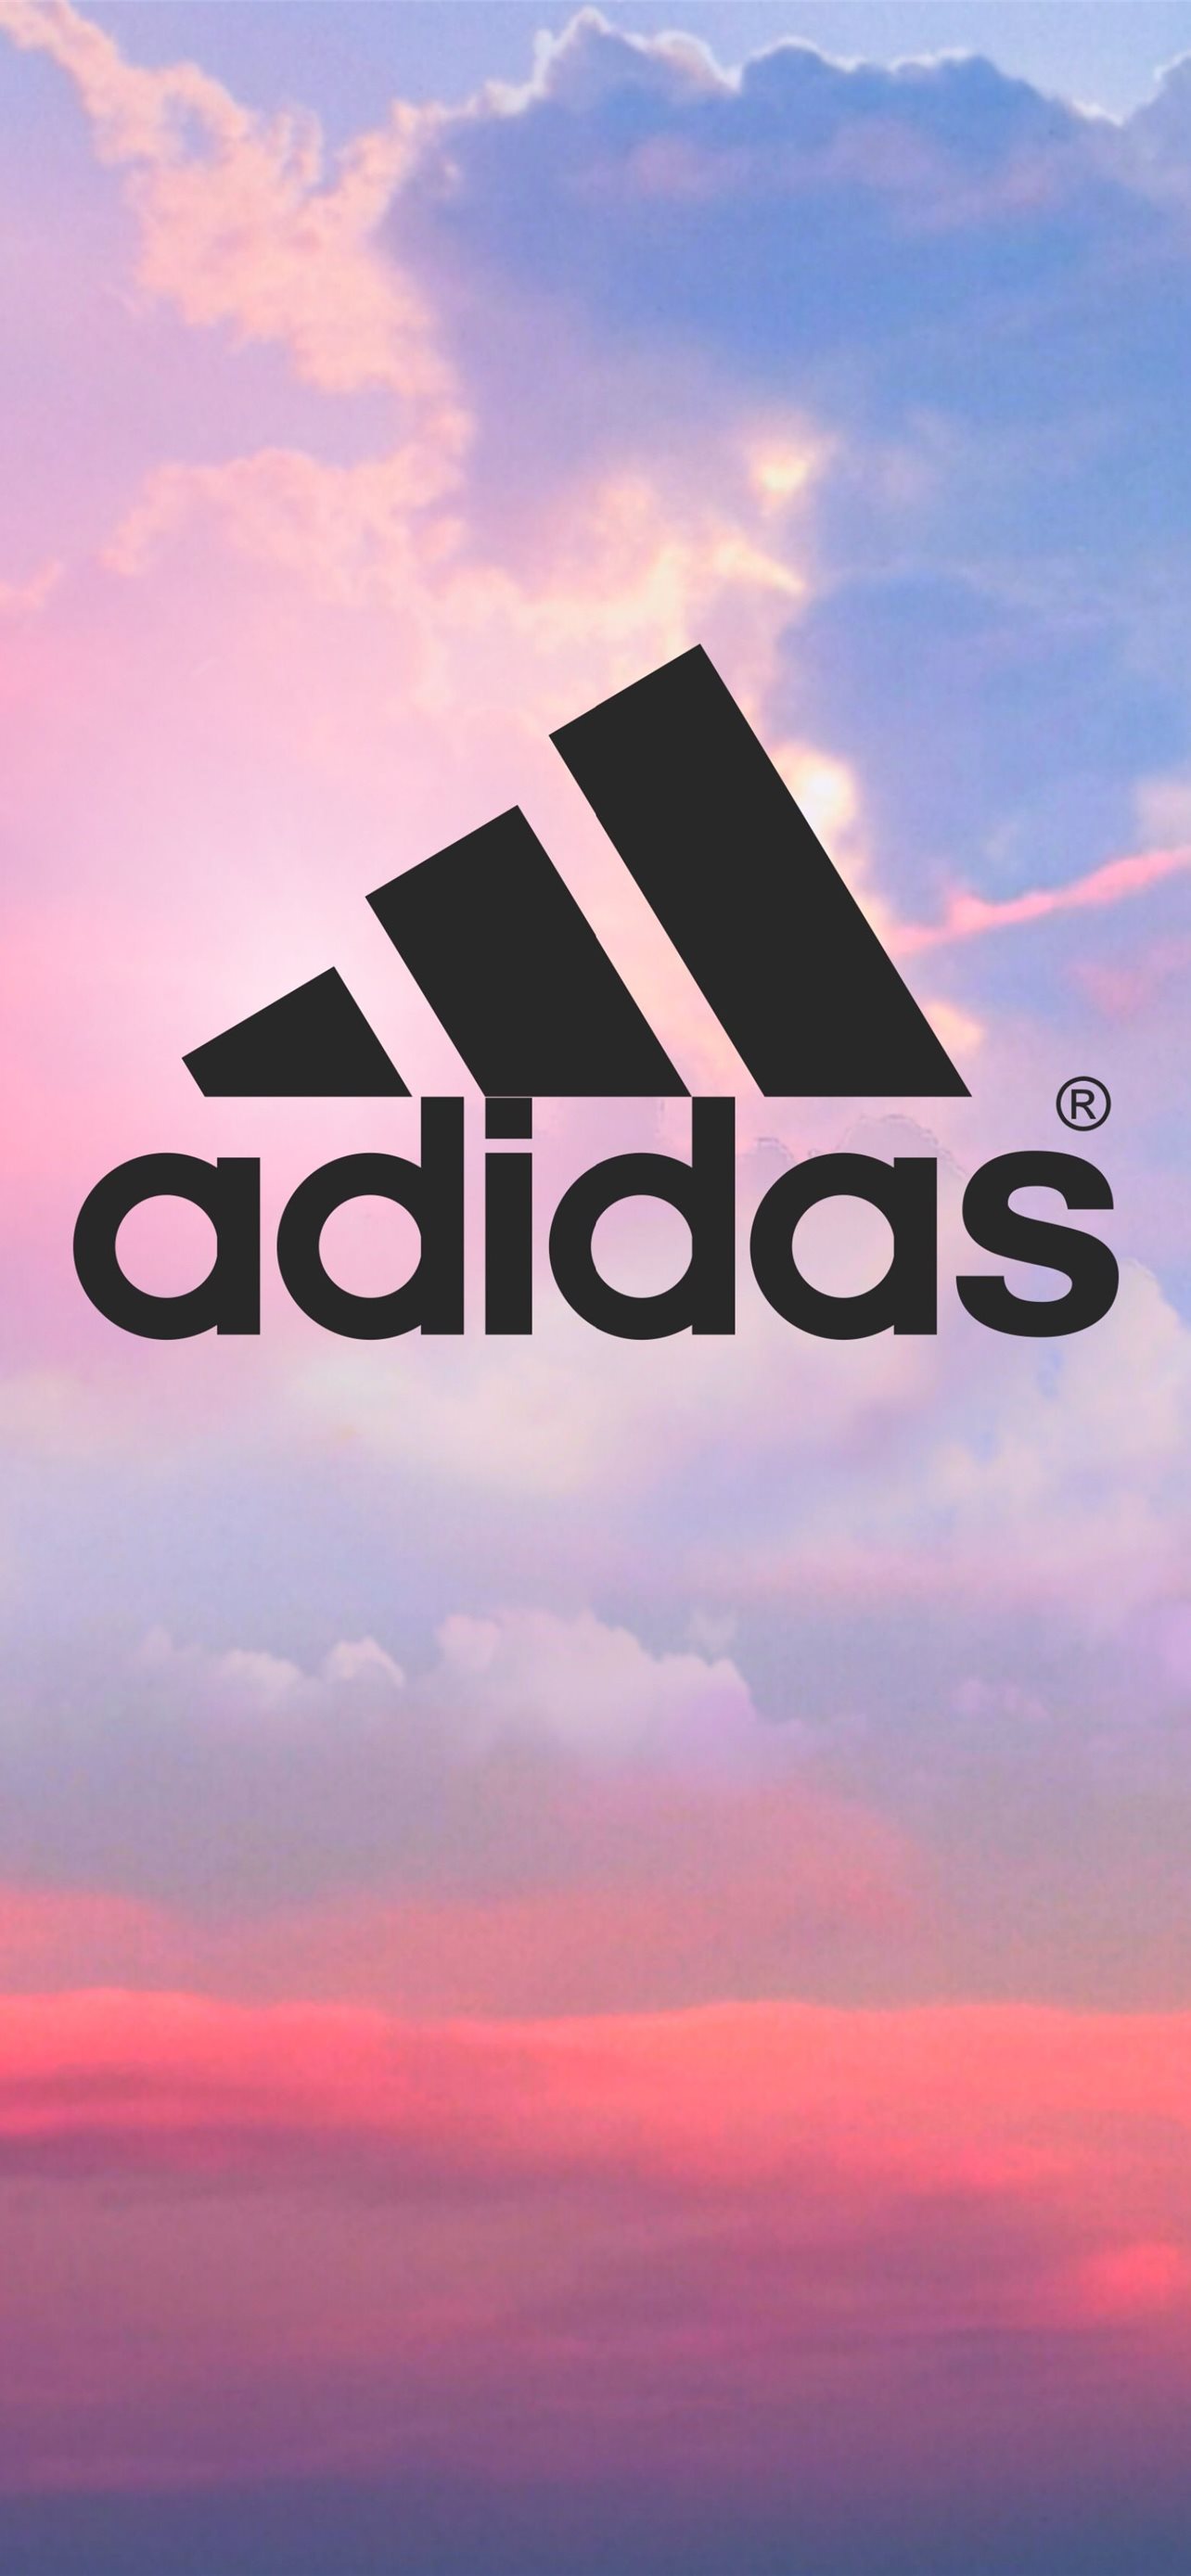 Download Blue Aesthetic Adidas Dope Iphone Wallpaper | Wallpapers.com